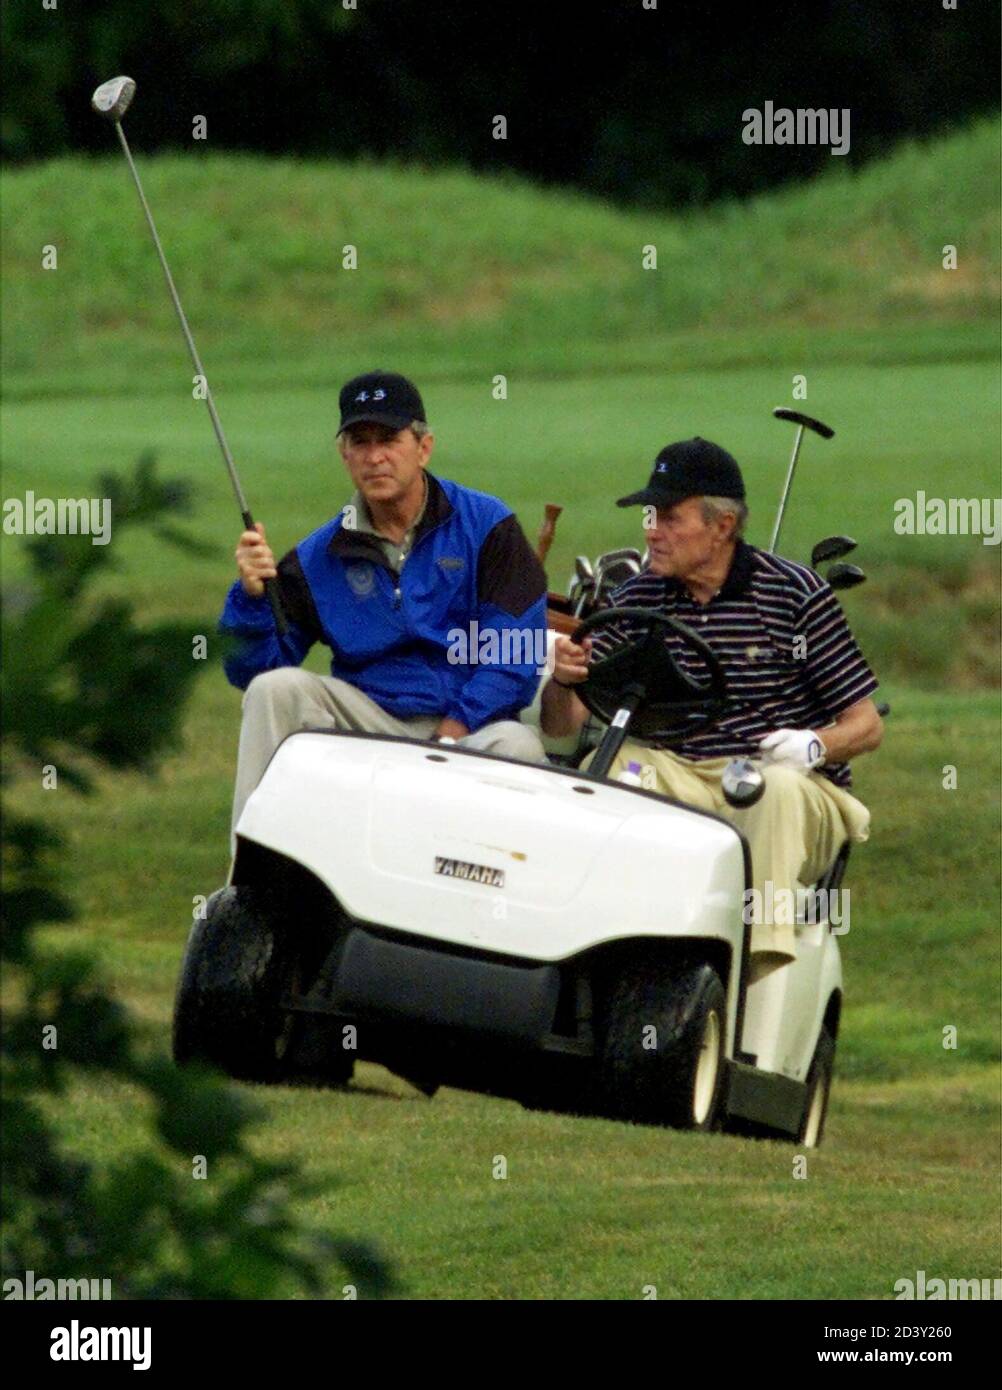 President George W. Bush (L) rides in a golf cart driven by his father, former President George Bush (R), as they play an early morning round of golf together at Cape Arundel Golf Club July 6, 2001 in Kennebunkport, Maine.The two men were wearing matching caps marked '43' and '41,' referring to the numbers of their presidencies. Stock Photo